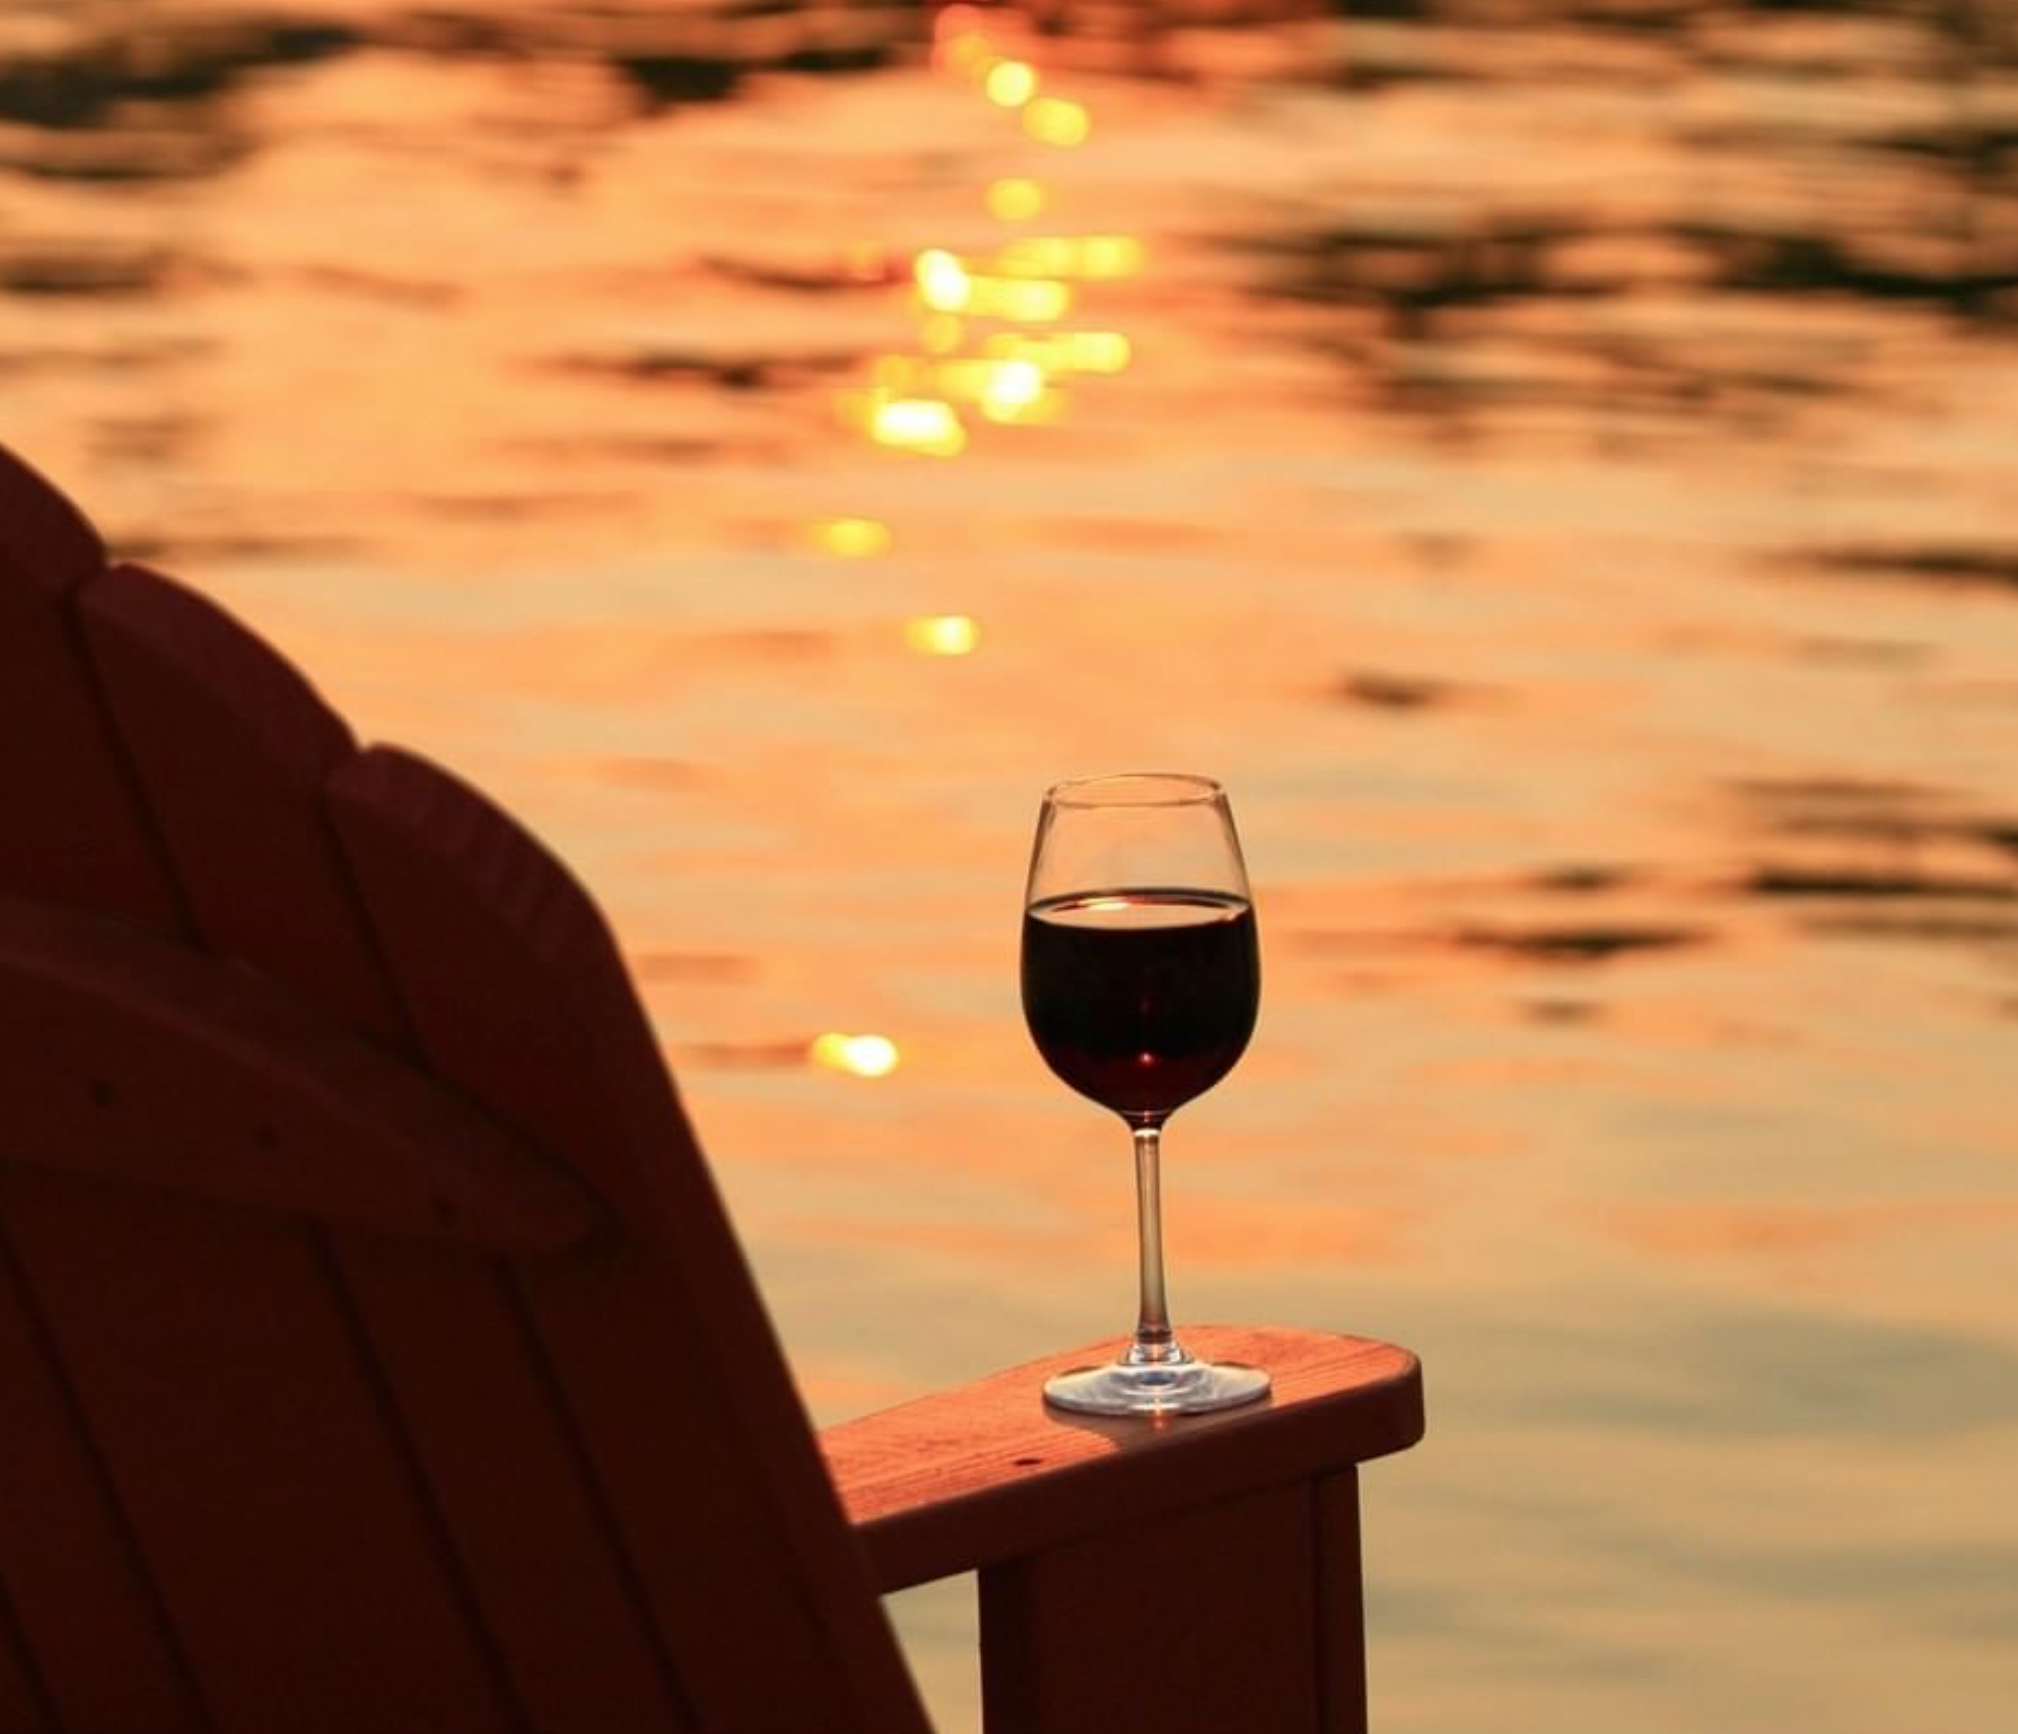 A orange and yellow sunset reflecting onto the water on Lake Conroe at the Margaritaville Lake Resort. A glass of wine sits on a lawn chair.